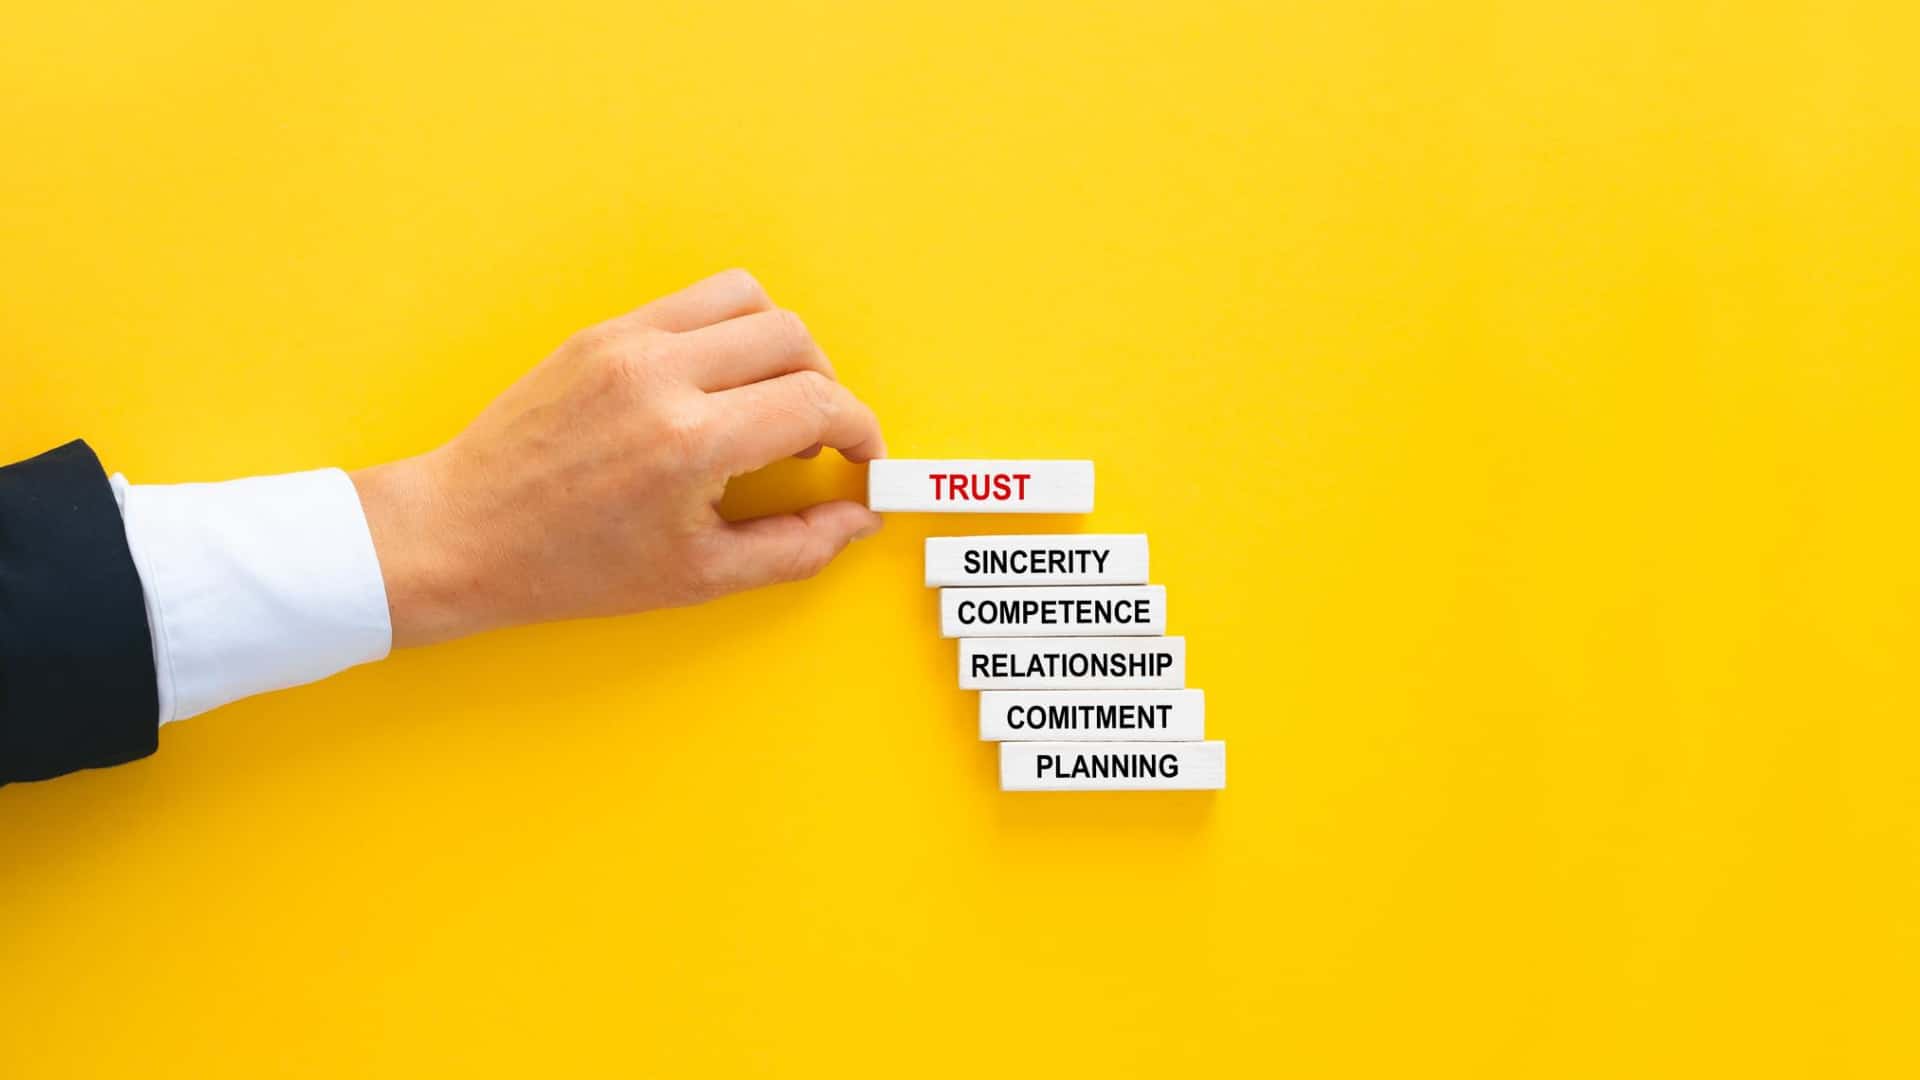 Establish Your Trustworthiness Right Up Front